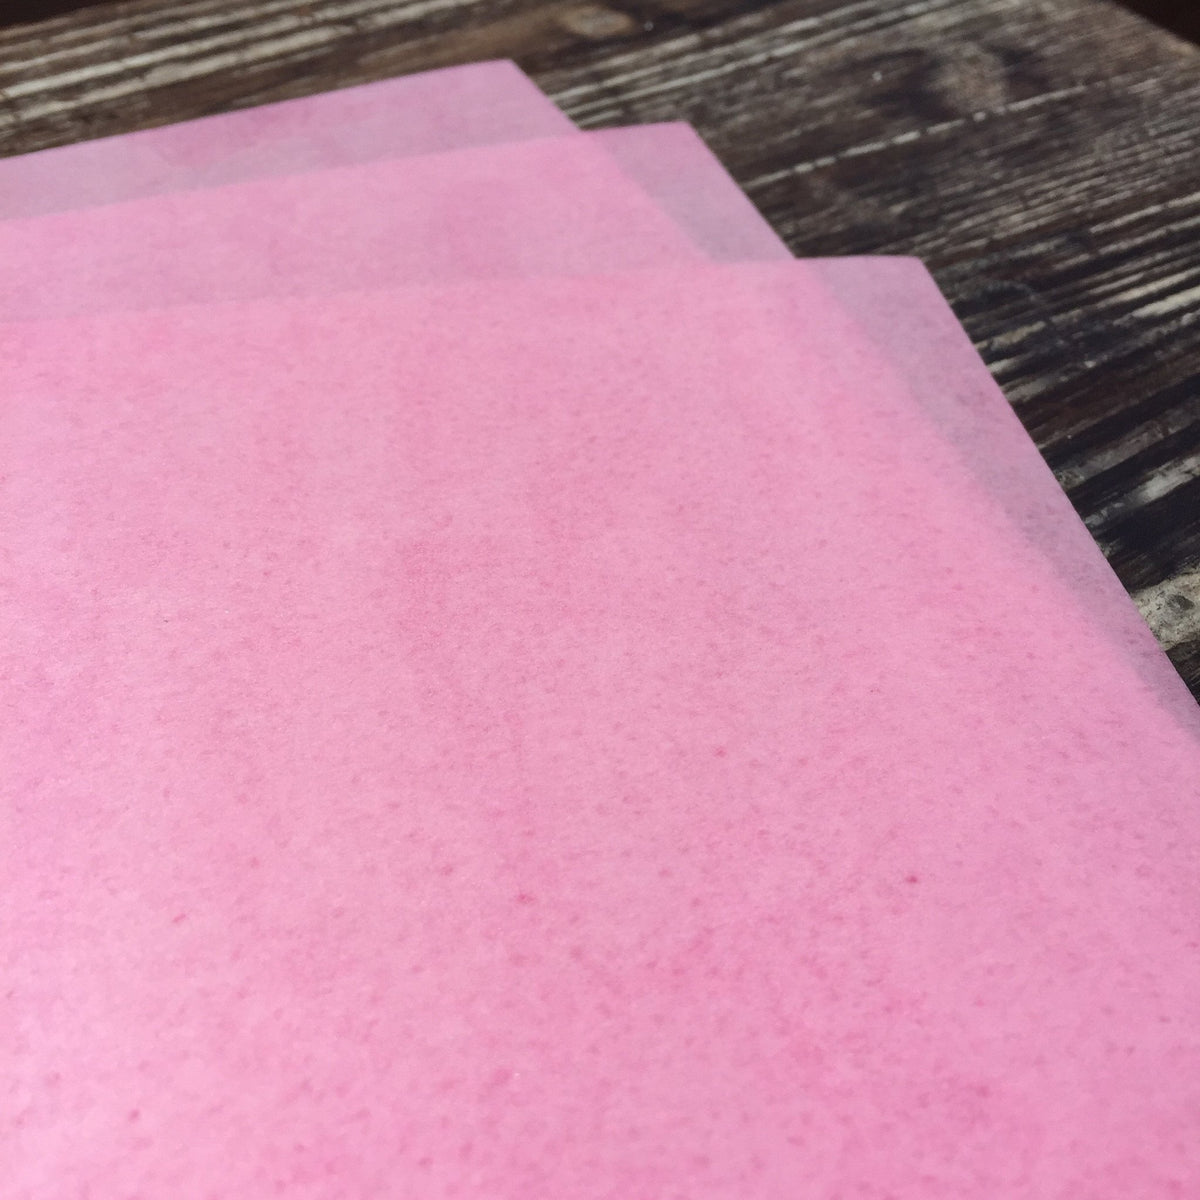 Fully Colored Pink Wafer Paper – Sugar Art Supply